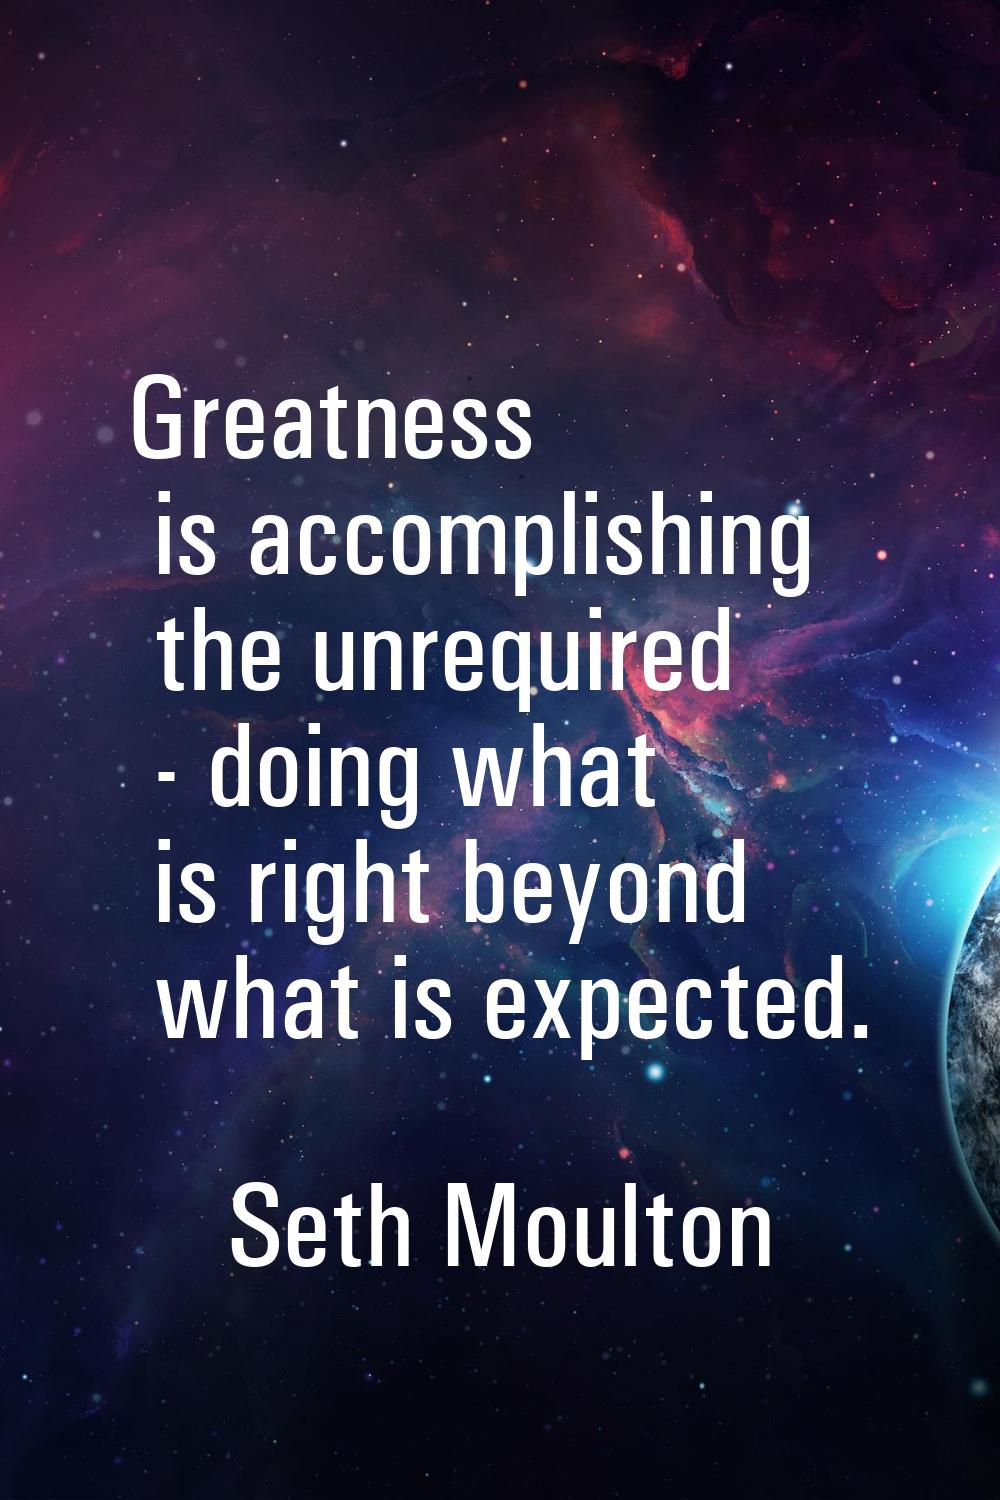 Greatness is accomplishing the unrequired - doing what is right beyond what is expected.